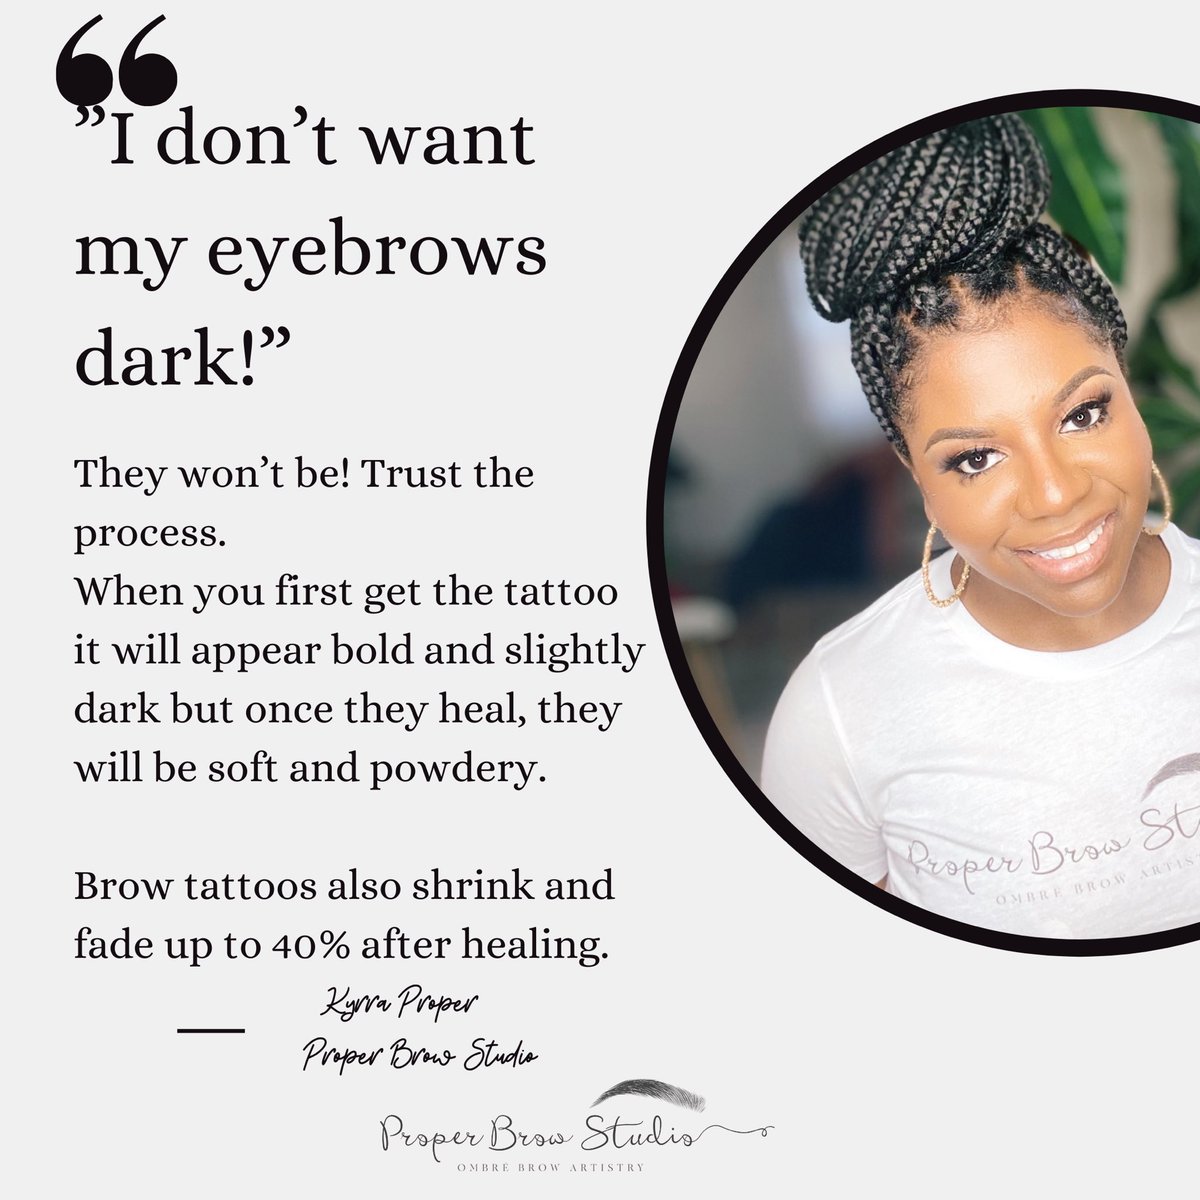 TRUST THE PROCESS SIS!

Swipe left to see what healed brows look like on my #properbrowbabe 

Follow on IG @ Properbrowstudio

#757brows #rvabrows #dmvbrows #vamicroshading #properbrowbabe #makeupbrowlook #semipermanentbrowsva #brows757 #browtransformation 
#hamptonbrows